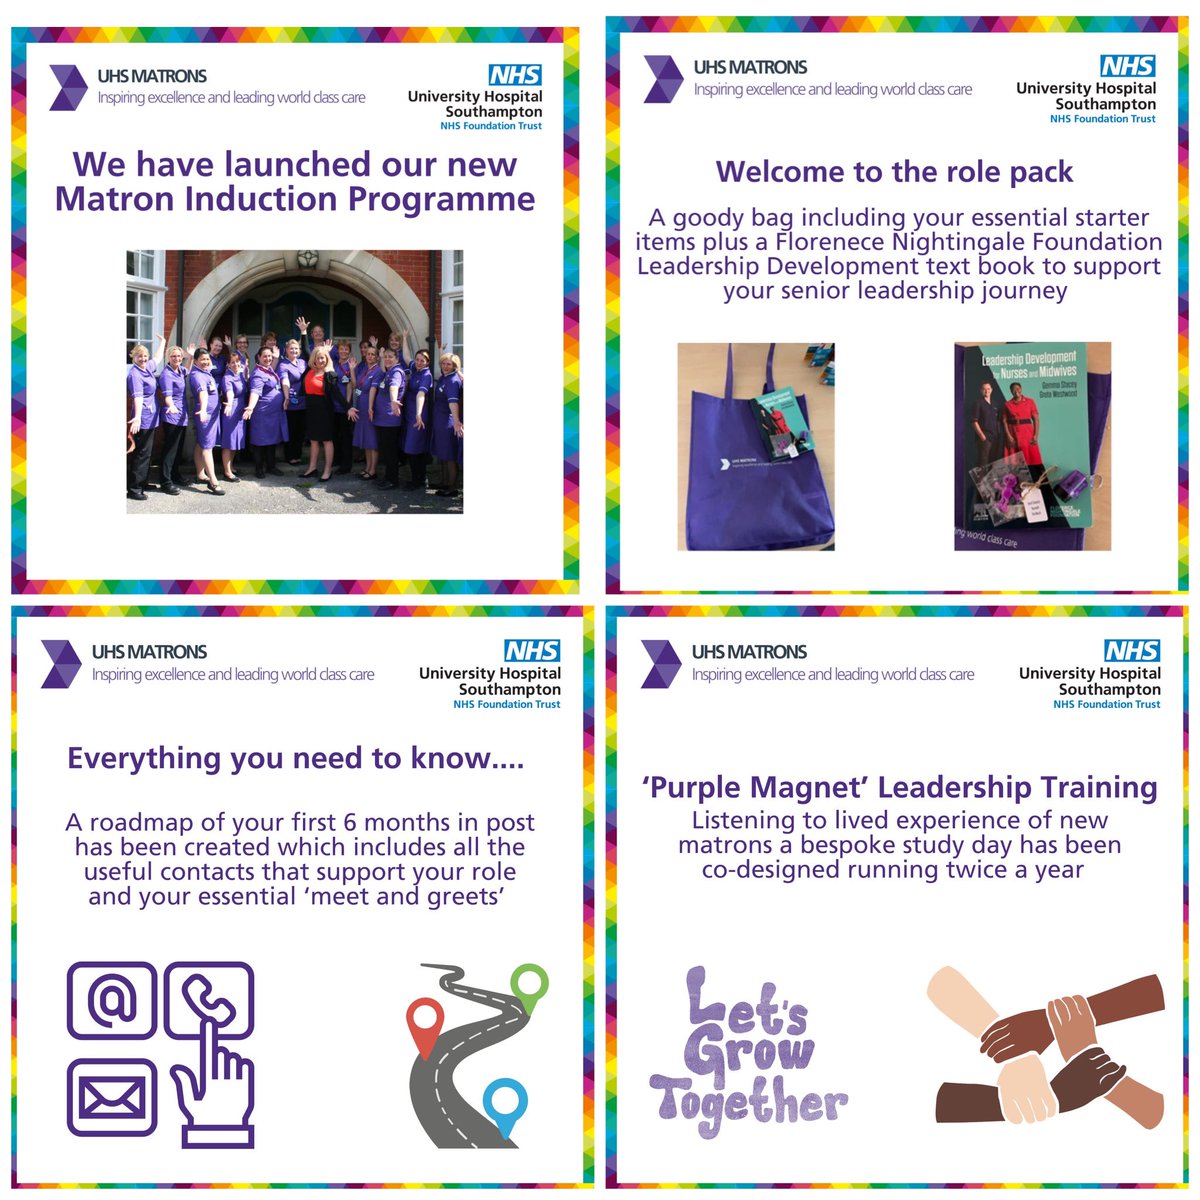 Our Matron Induction Programme is in full swing with the first “purple magnet” training session with a fab bunch of new matrons 💜 Thank you @UHS_OrgDev team for delivering an excellent session!
@gailbyrneuhs @hettie1972 @suzy_pike @NatashaWattsn3 @sarahjherbert @RosemaryChable